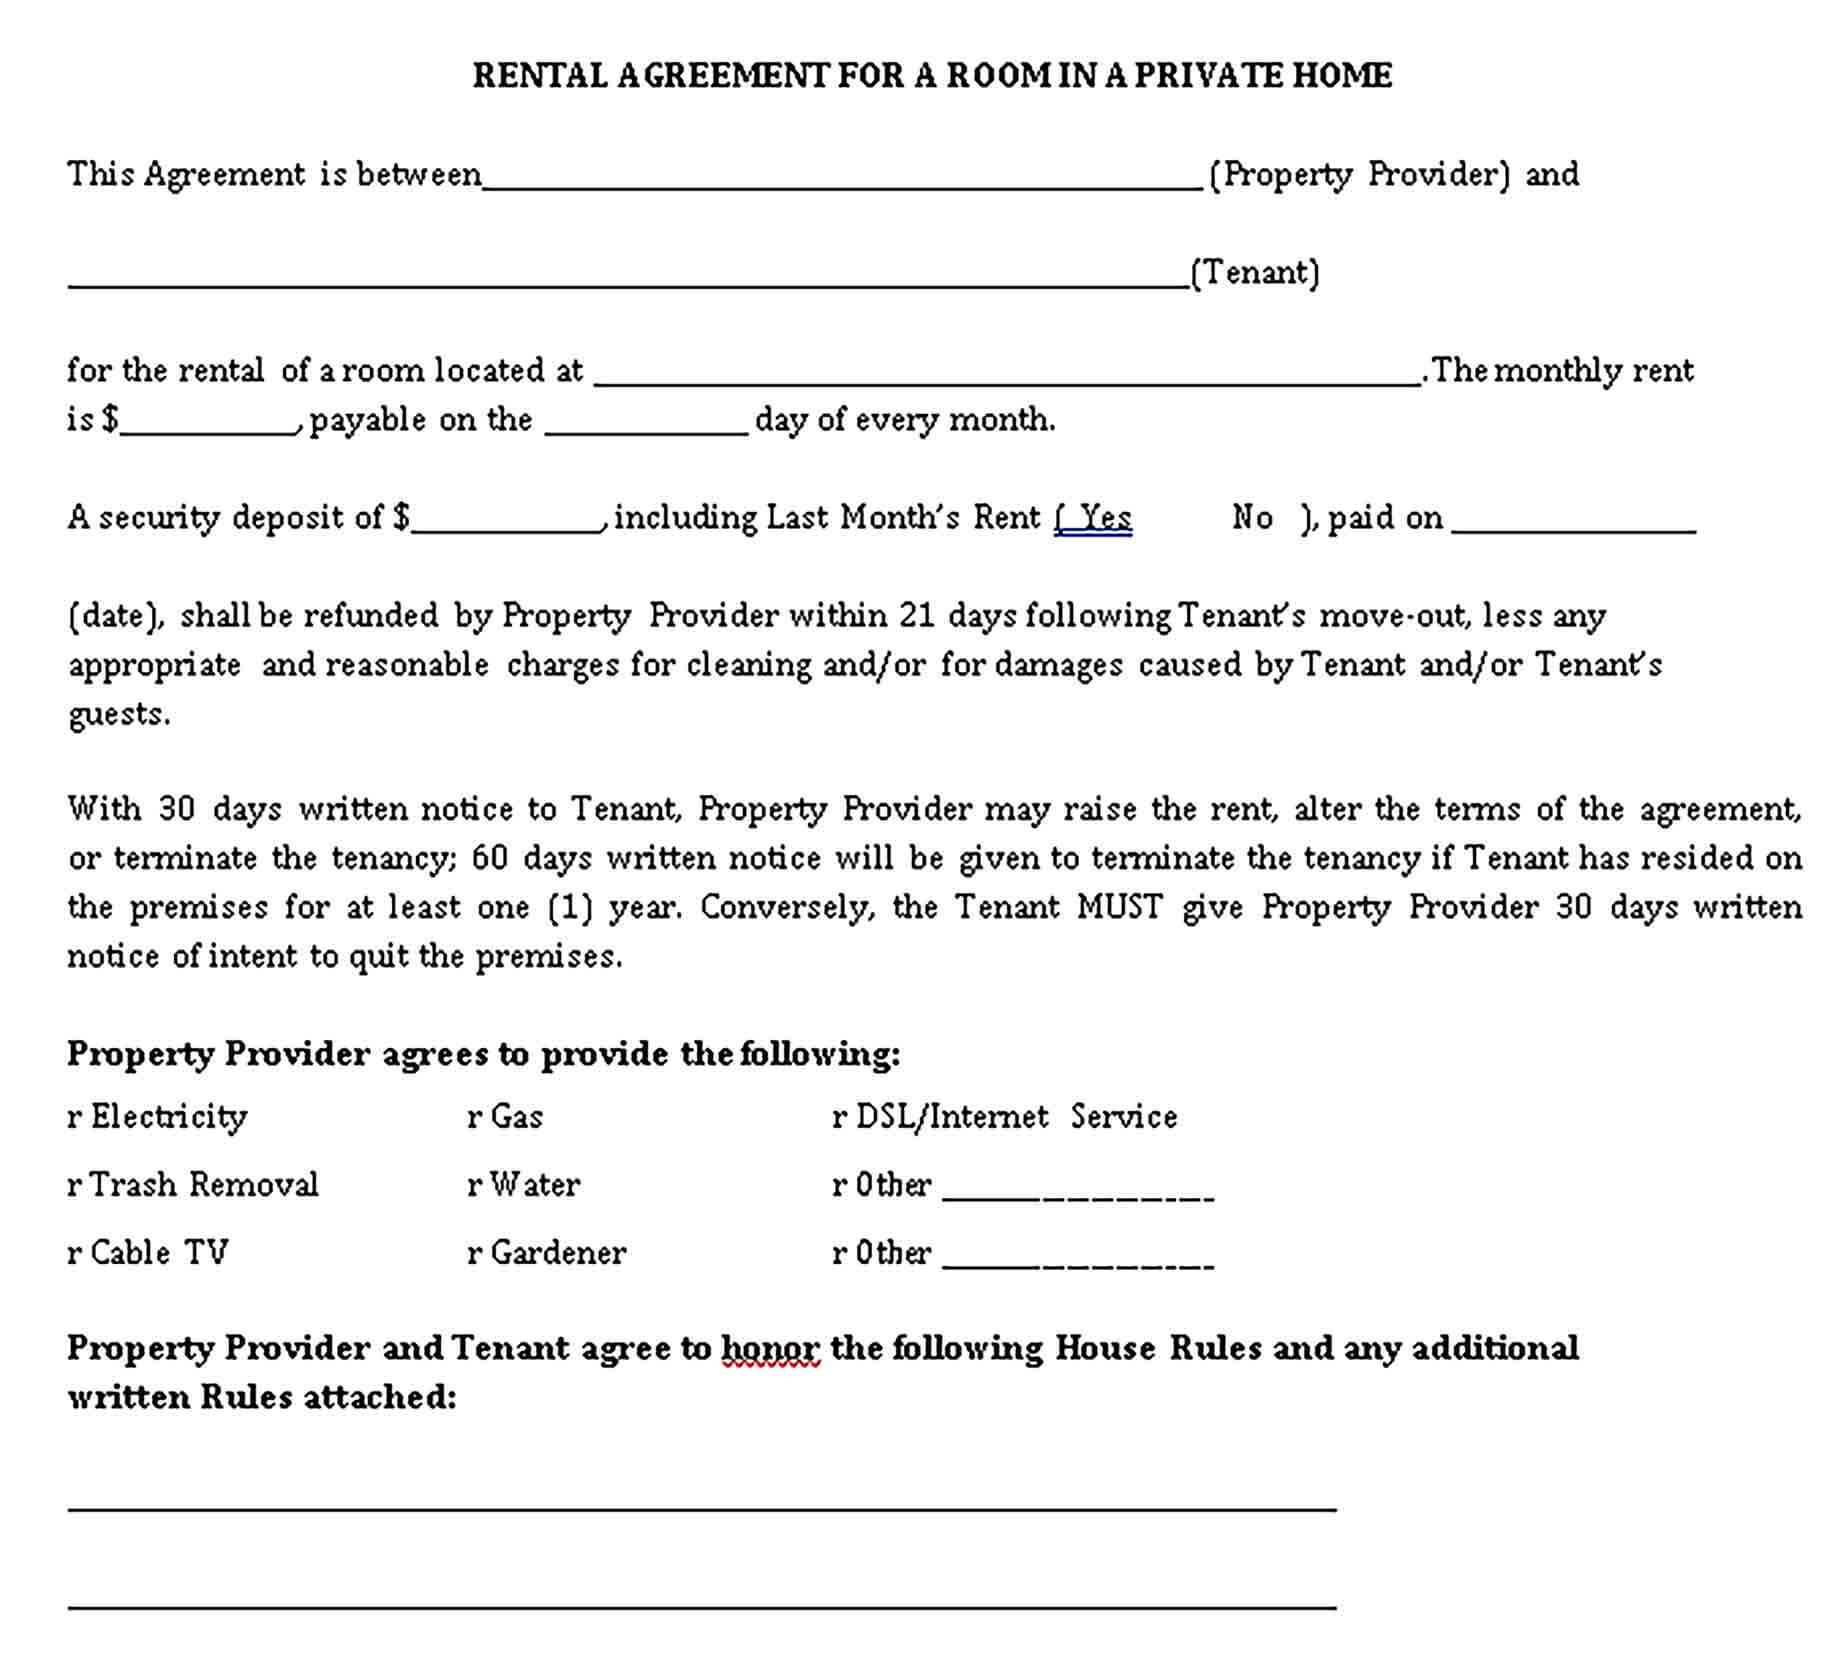 Templates Room Rental Agreement in Private Home Sample